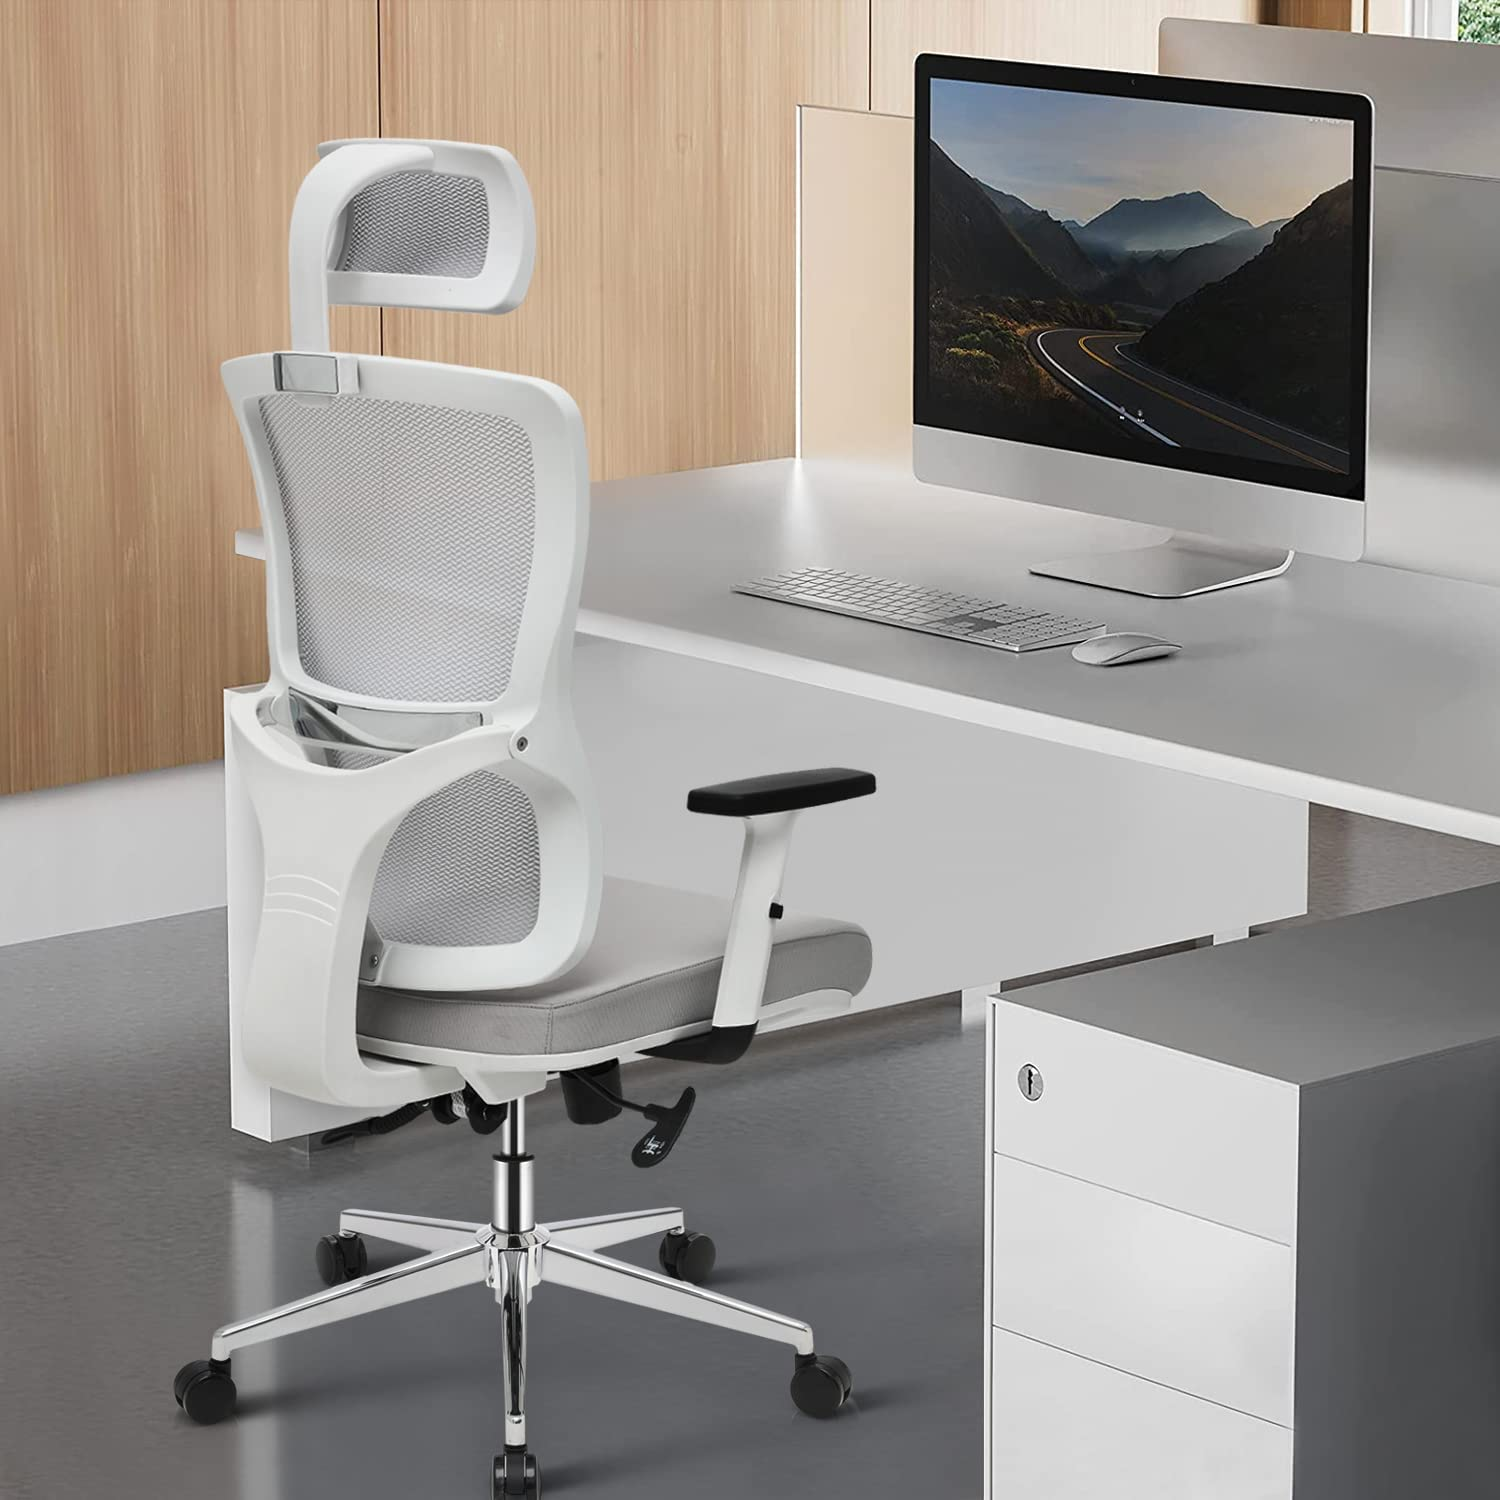 https://www.wyida.com/ergonomic-black and-white-office-room-swivel-computer-desk-chair-for-office-product/